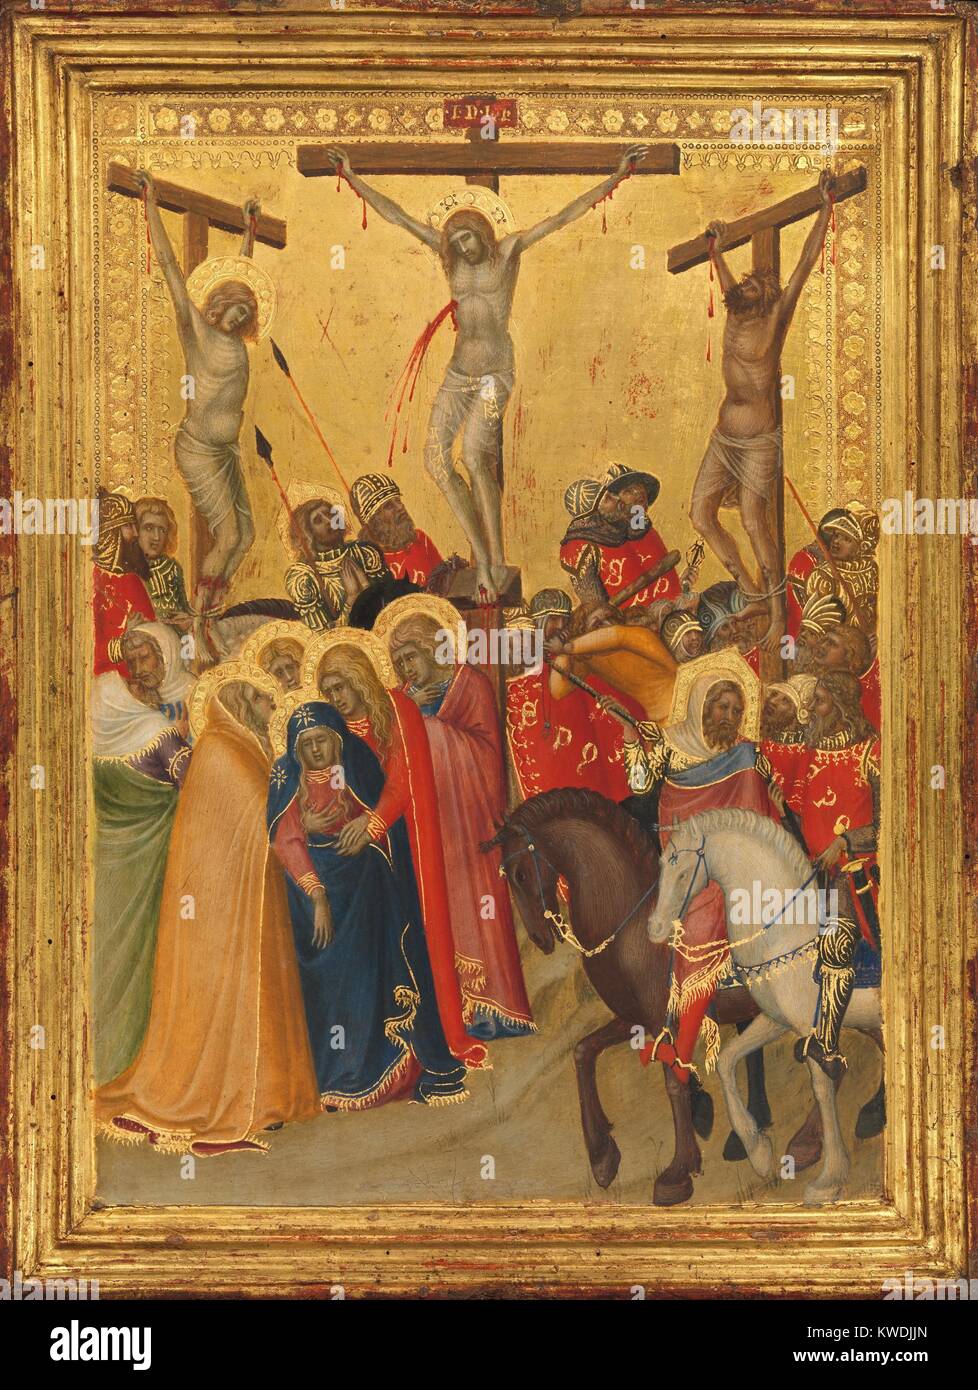 THE CRUCIFIXION, by Pietro Lorenzetti, 1340s, Italian Renaissance painting, tempera, oil on wood. Lorenzetti added narrative elements to this 14th century Sienese work: Christ’s side pierced by a spear; the thieves broken legs; the fainting falling Virgin; the conversing horsemen (BSLOC 2017 16 56) Stock Photo